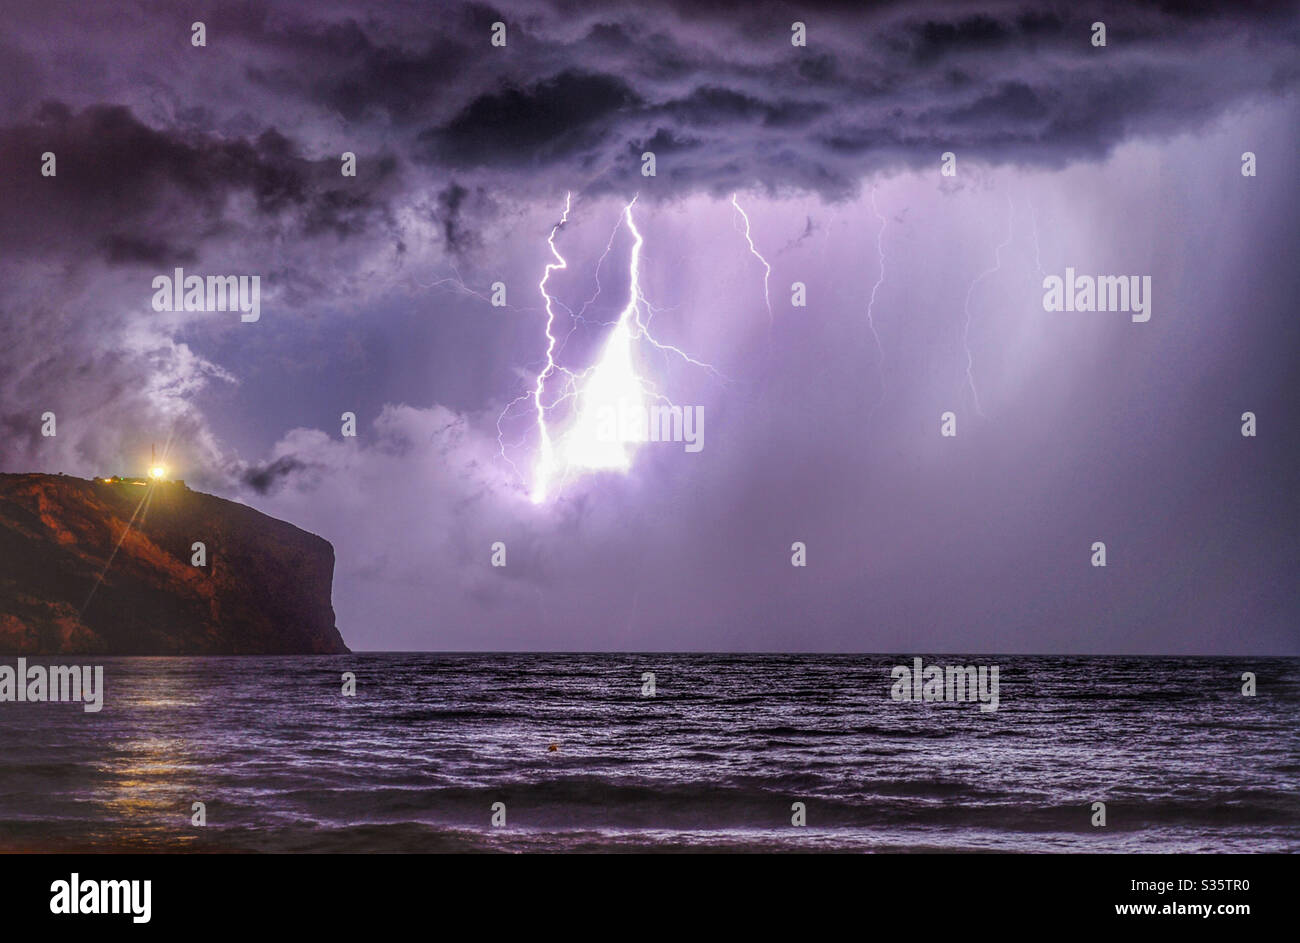 Electric storm with fork and sheet lightning over sea Stock Photo